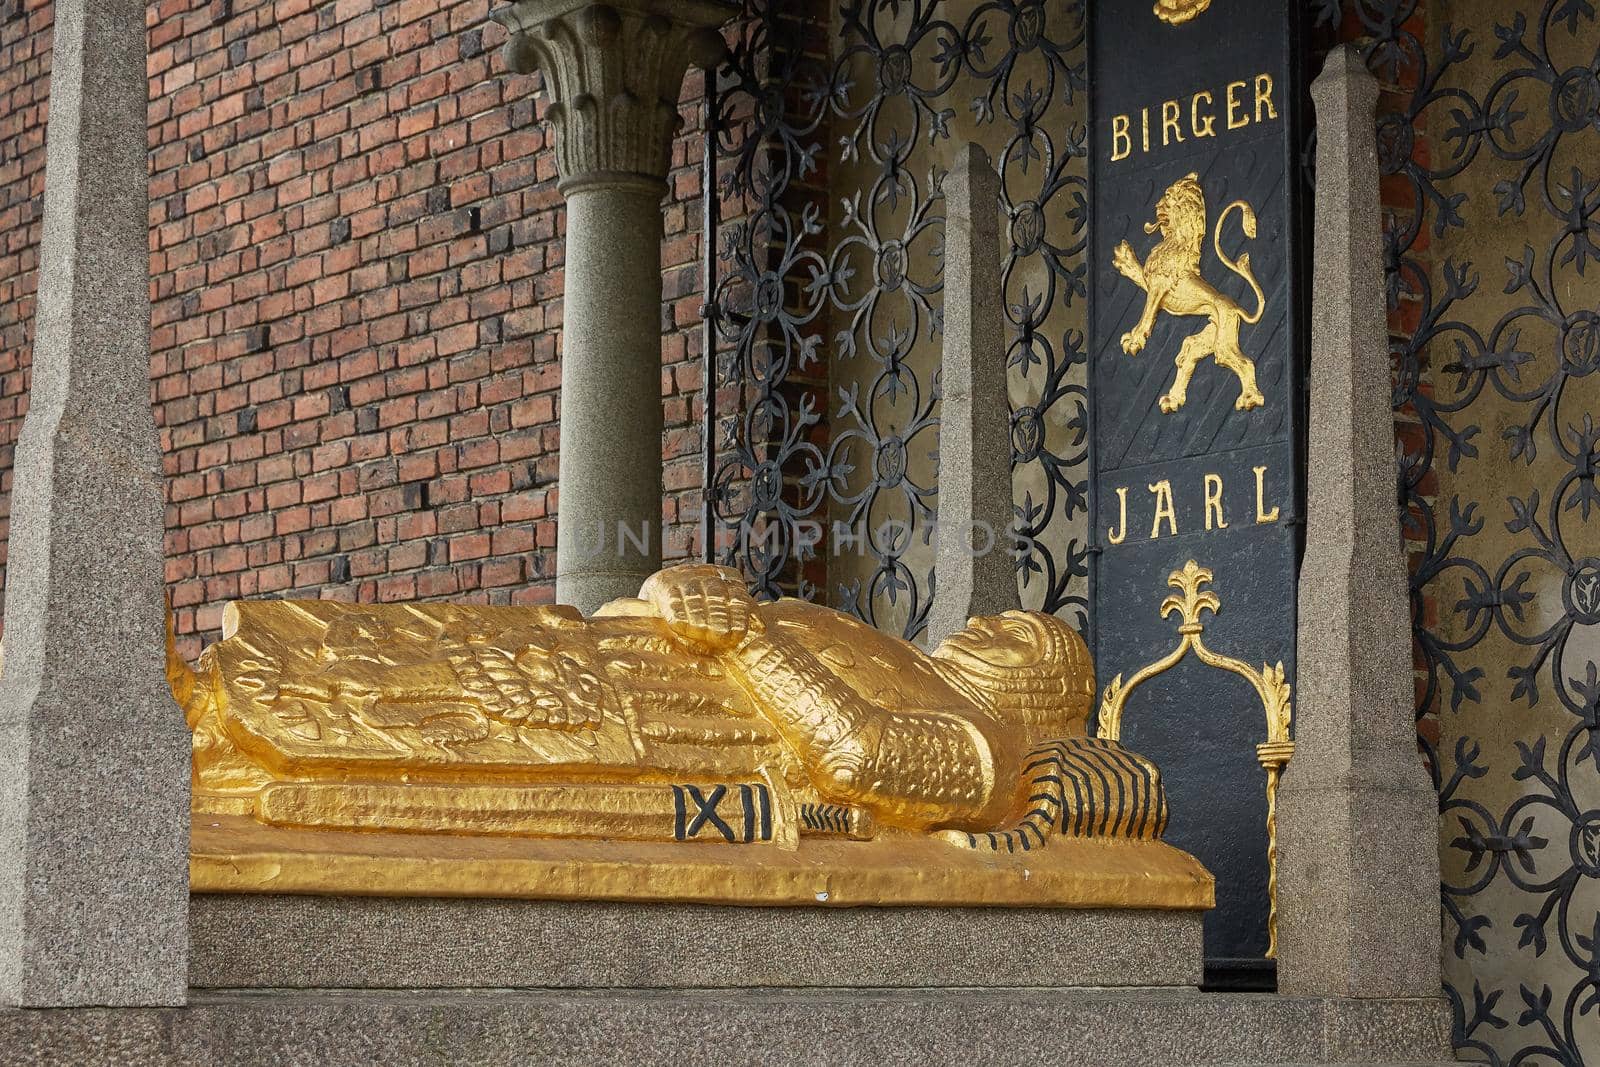 Tomb of Birger Magnusson, who founded Stockholm in the 13th century at Stadshuset by wondry